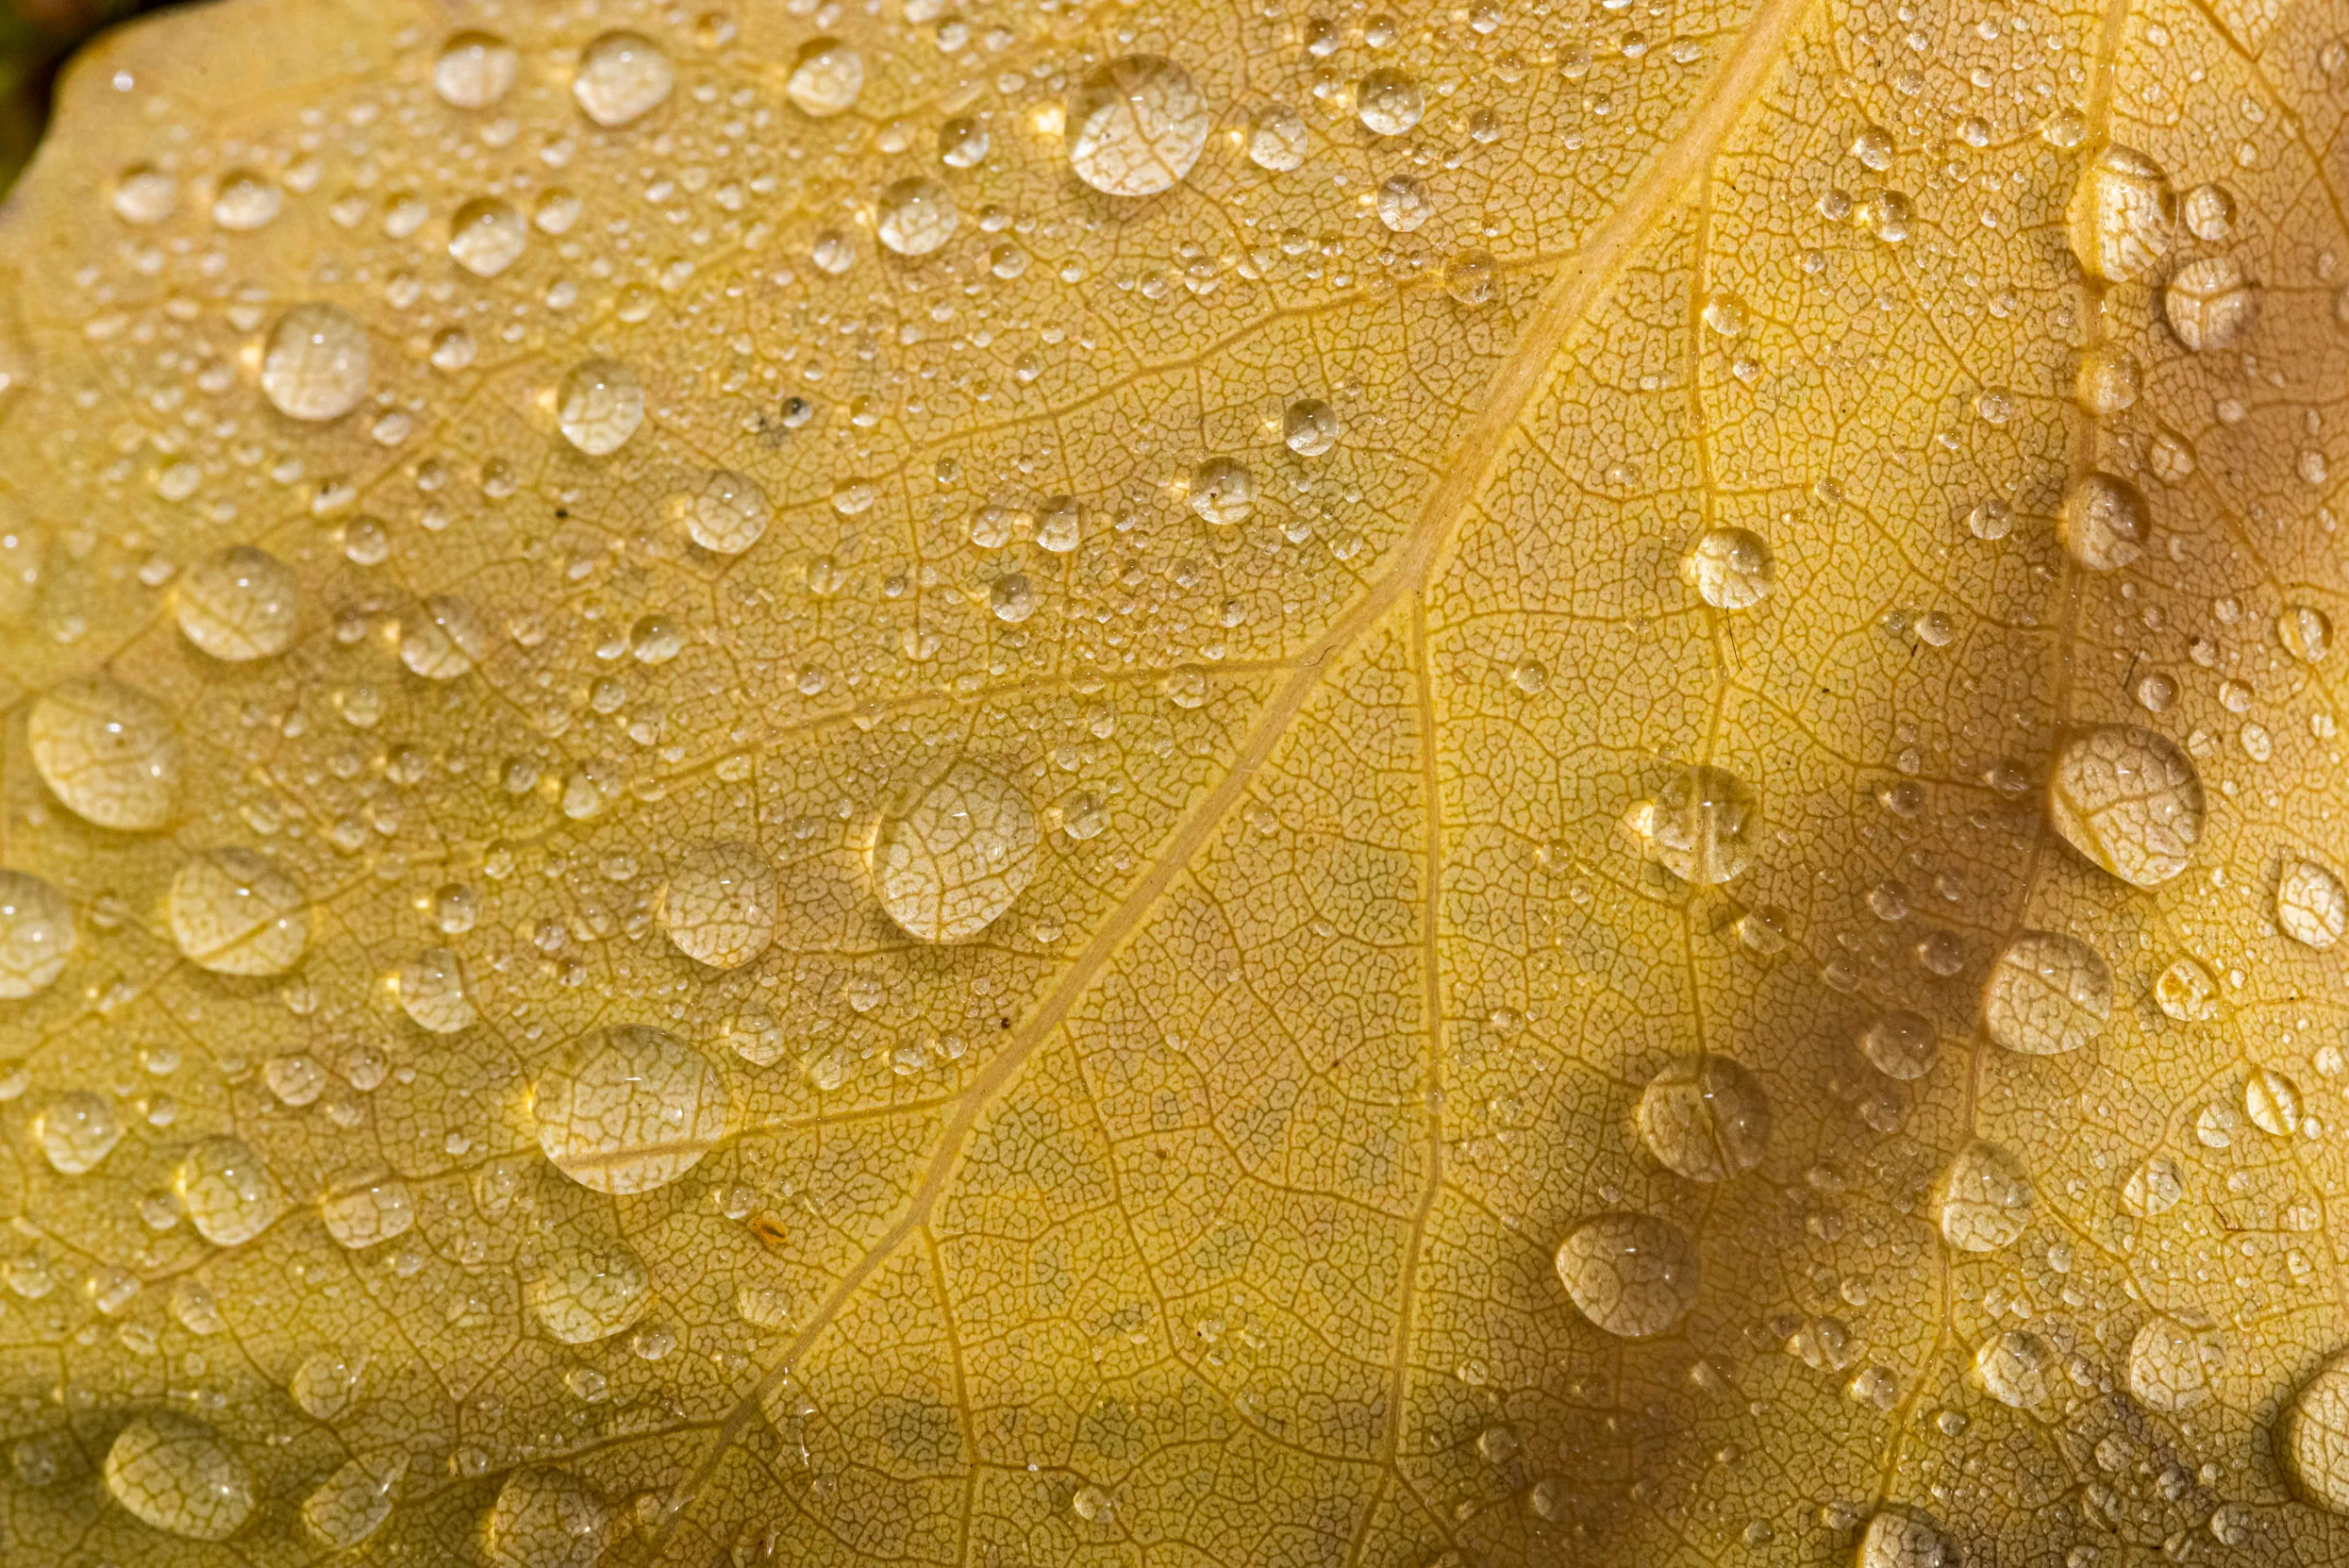 A close up of a yellow leaf covered in raindrops.